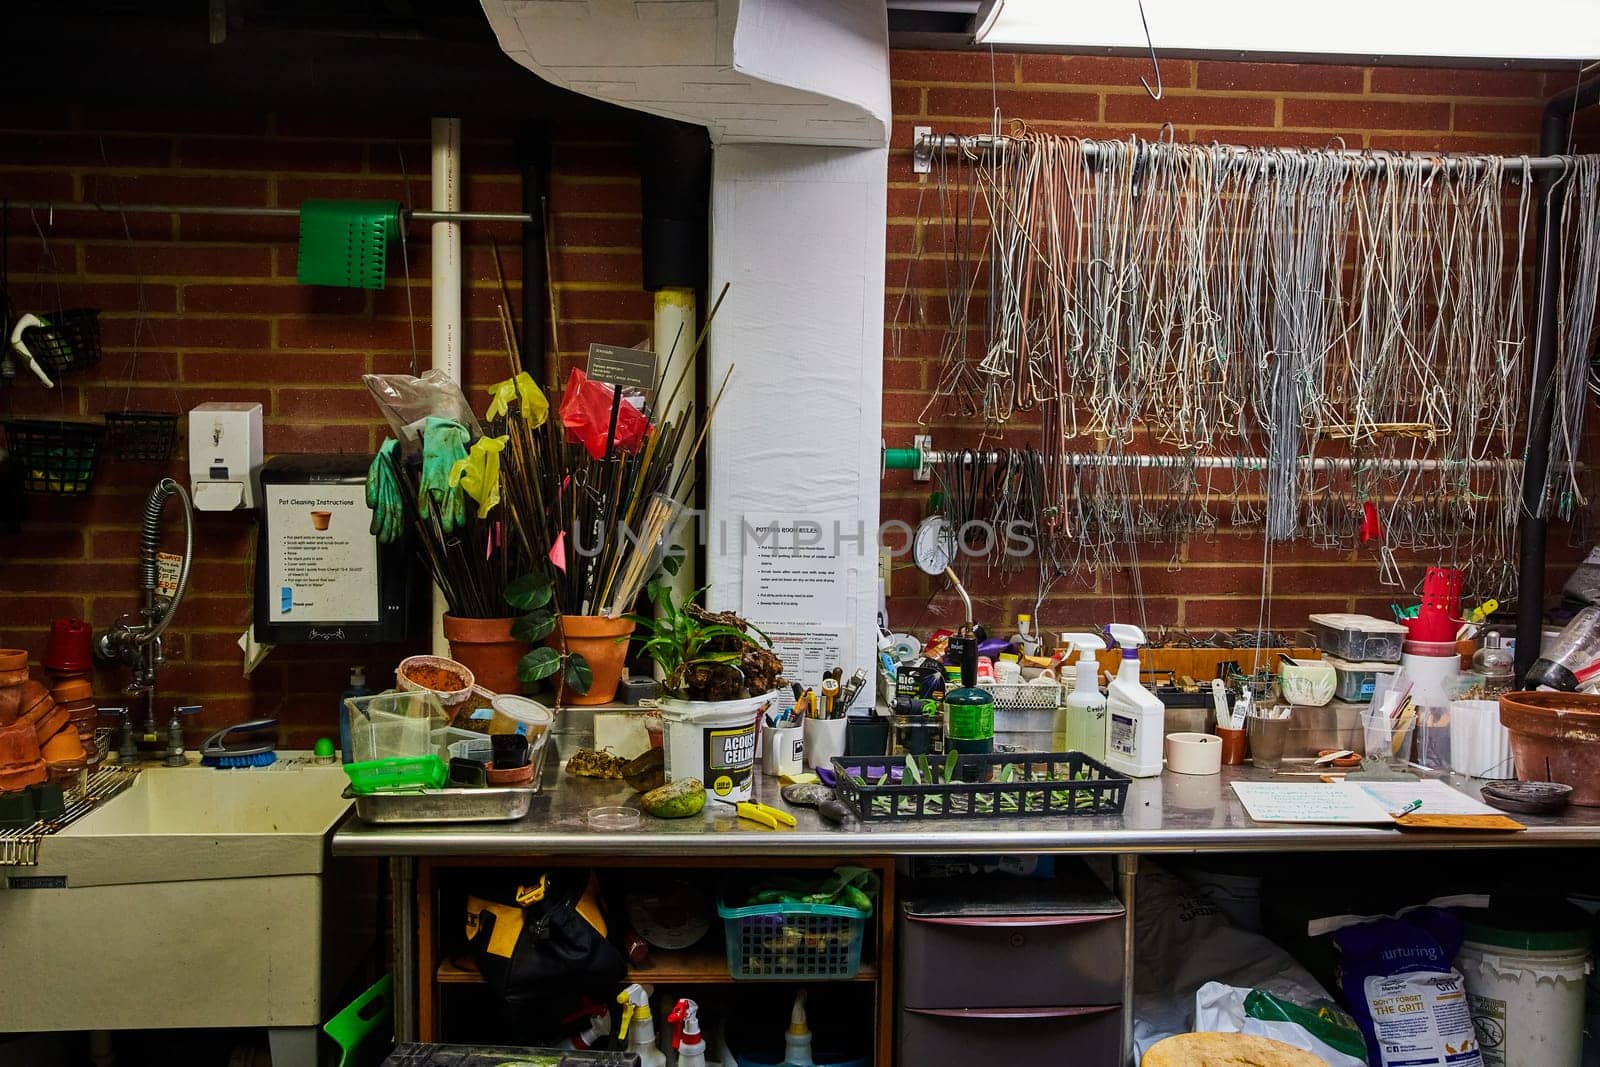 Inside a bustling pottery studio in Muncie, Indiana, showcasing a tableau of organized chaos with tools, materials, and artisan's notebook amidst rustic interiors, 2023